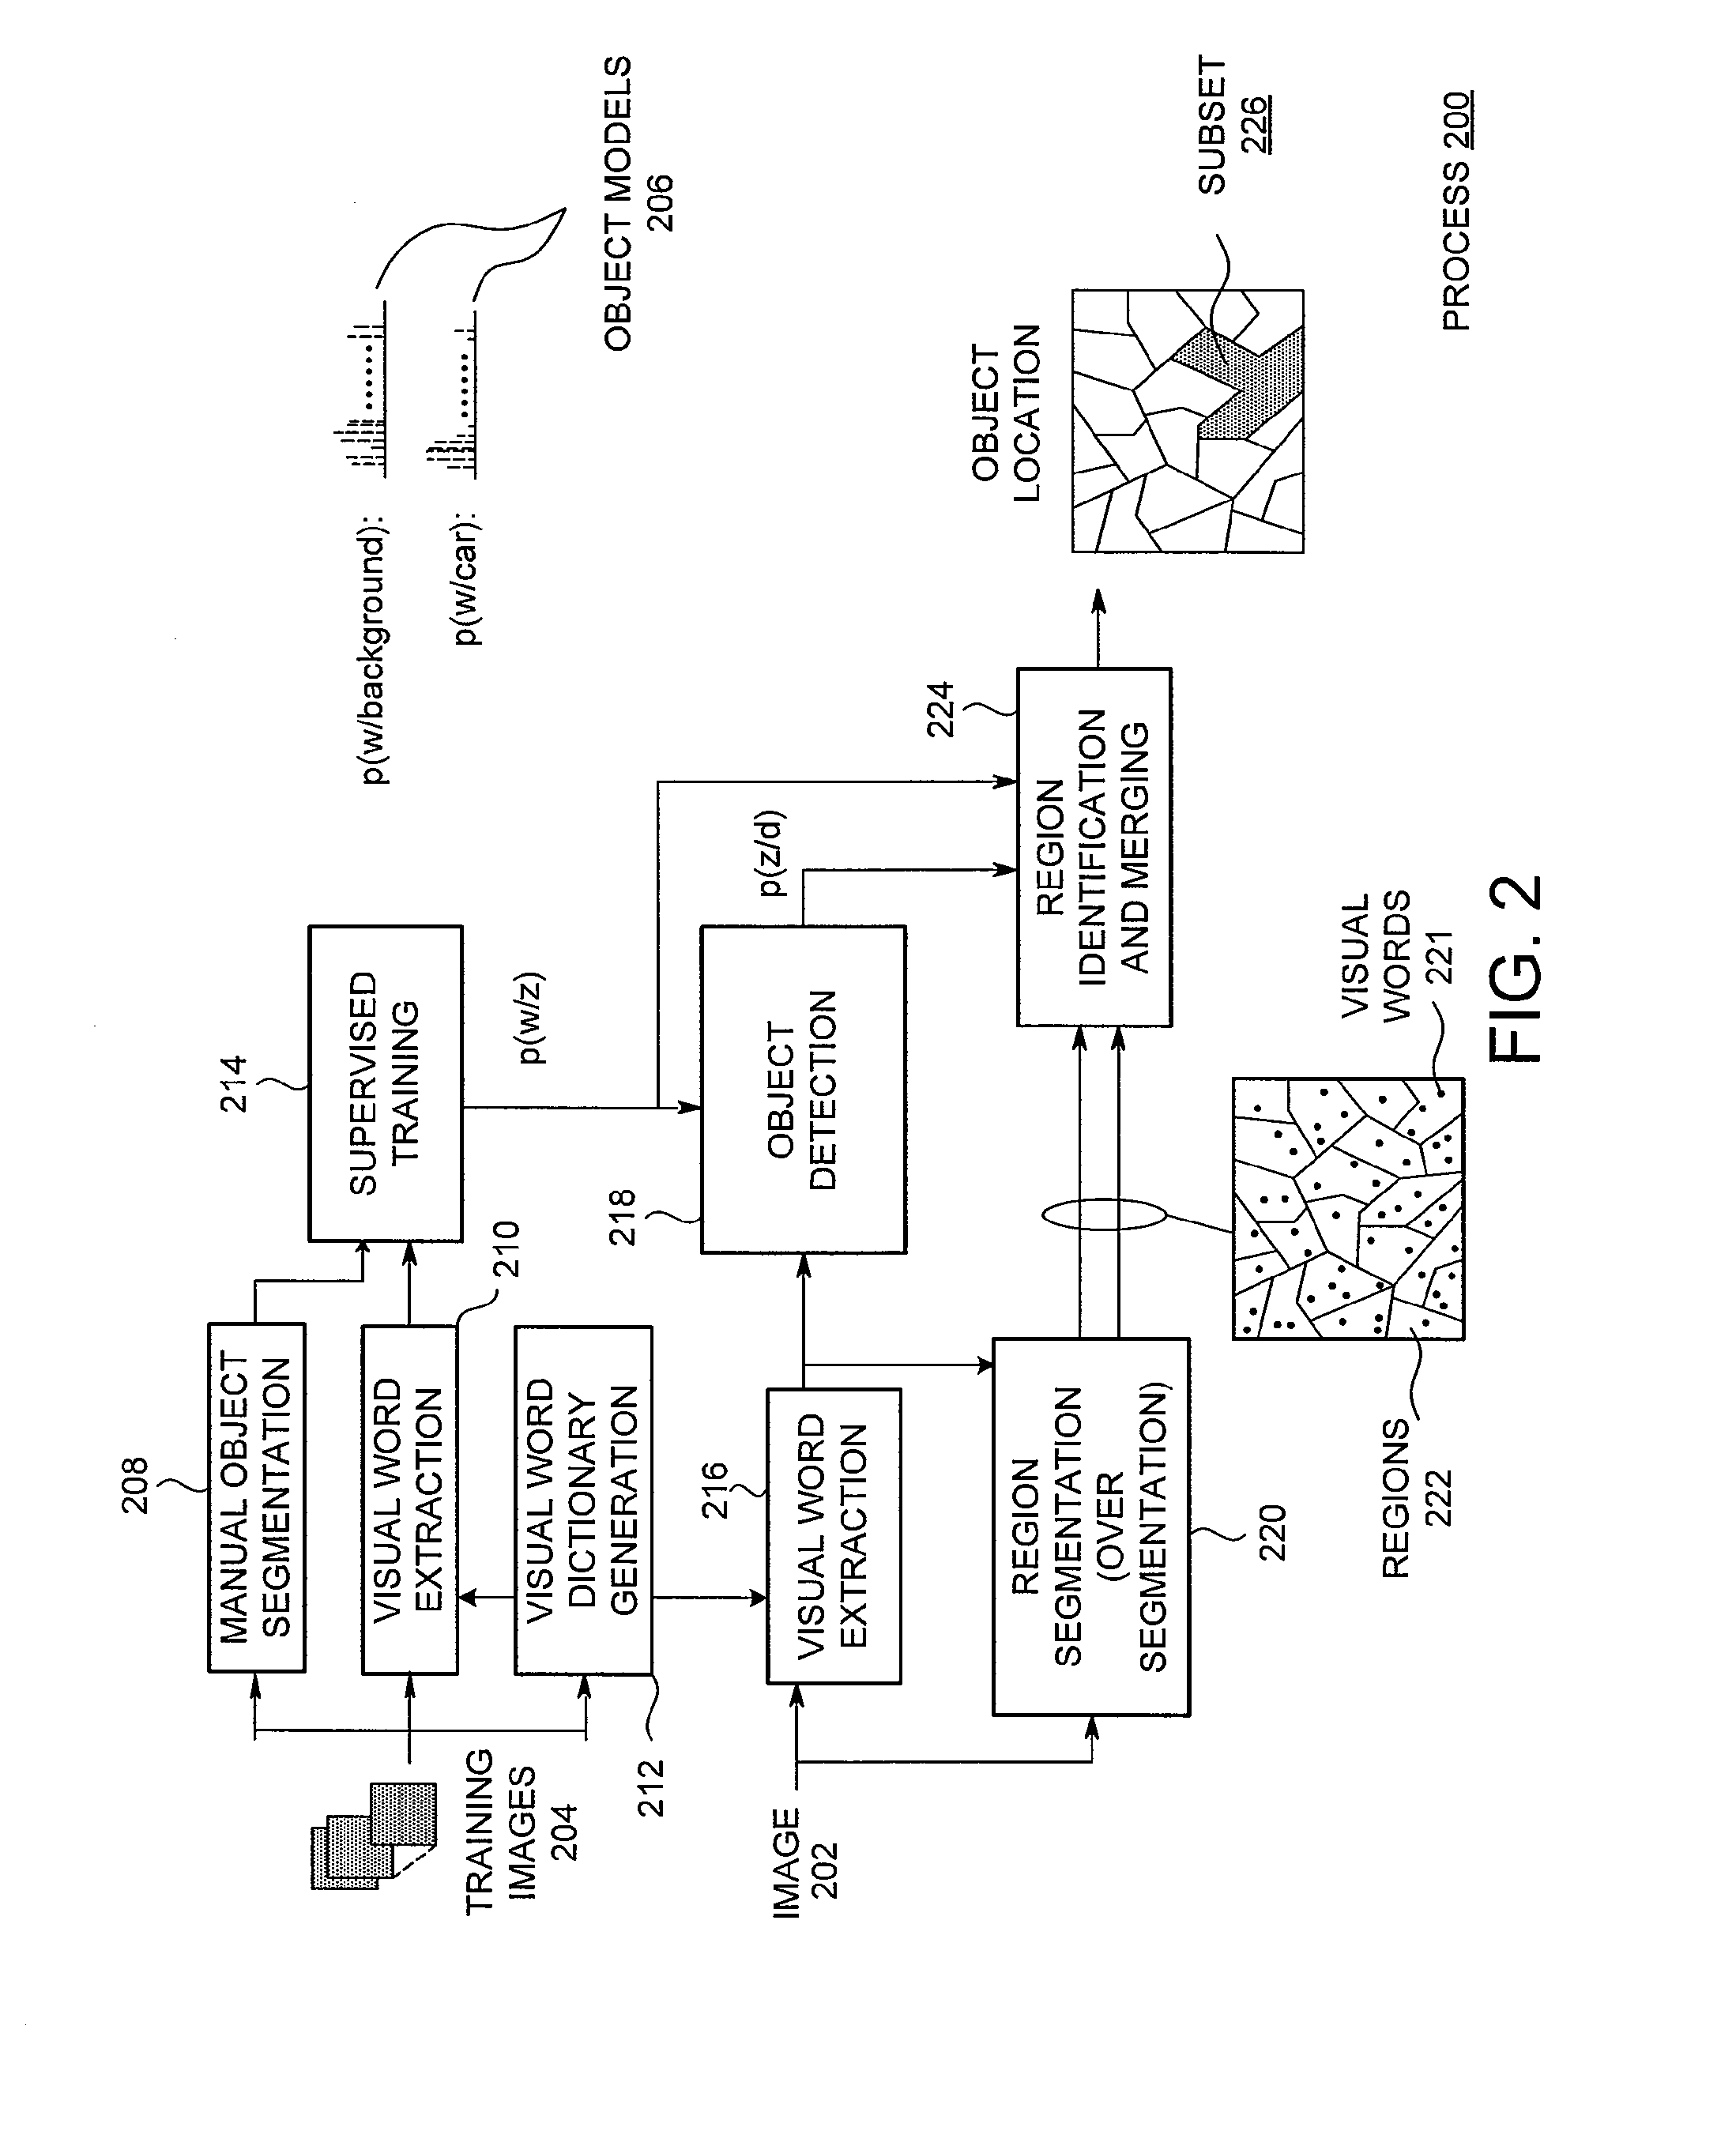 Method and apparatus for localizing an object within an image